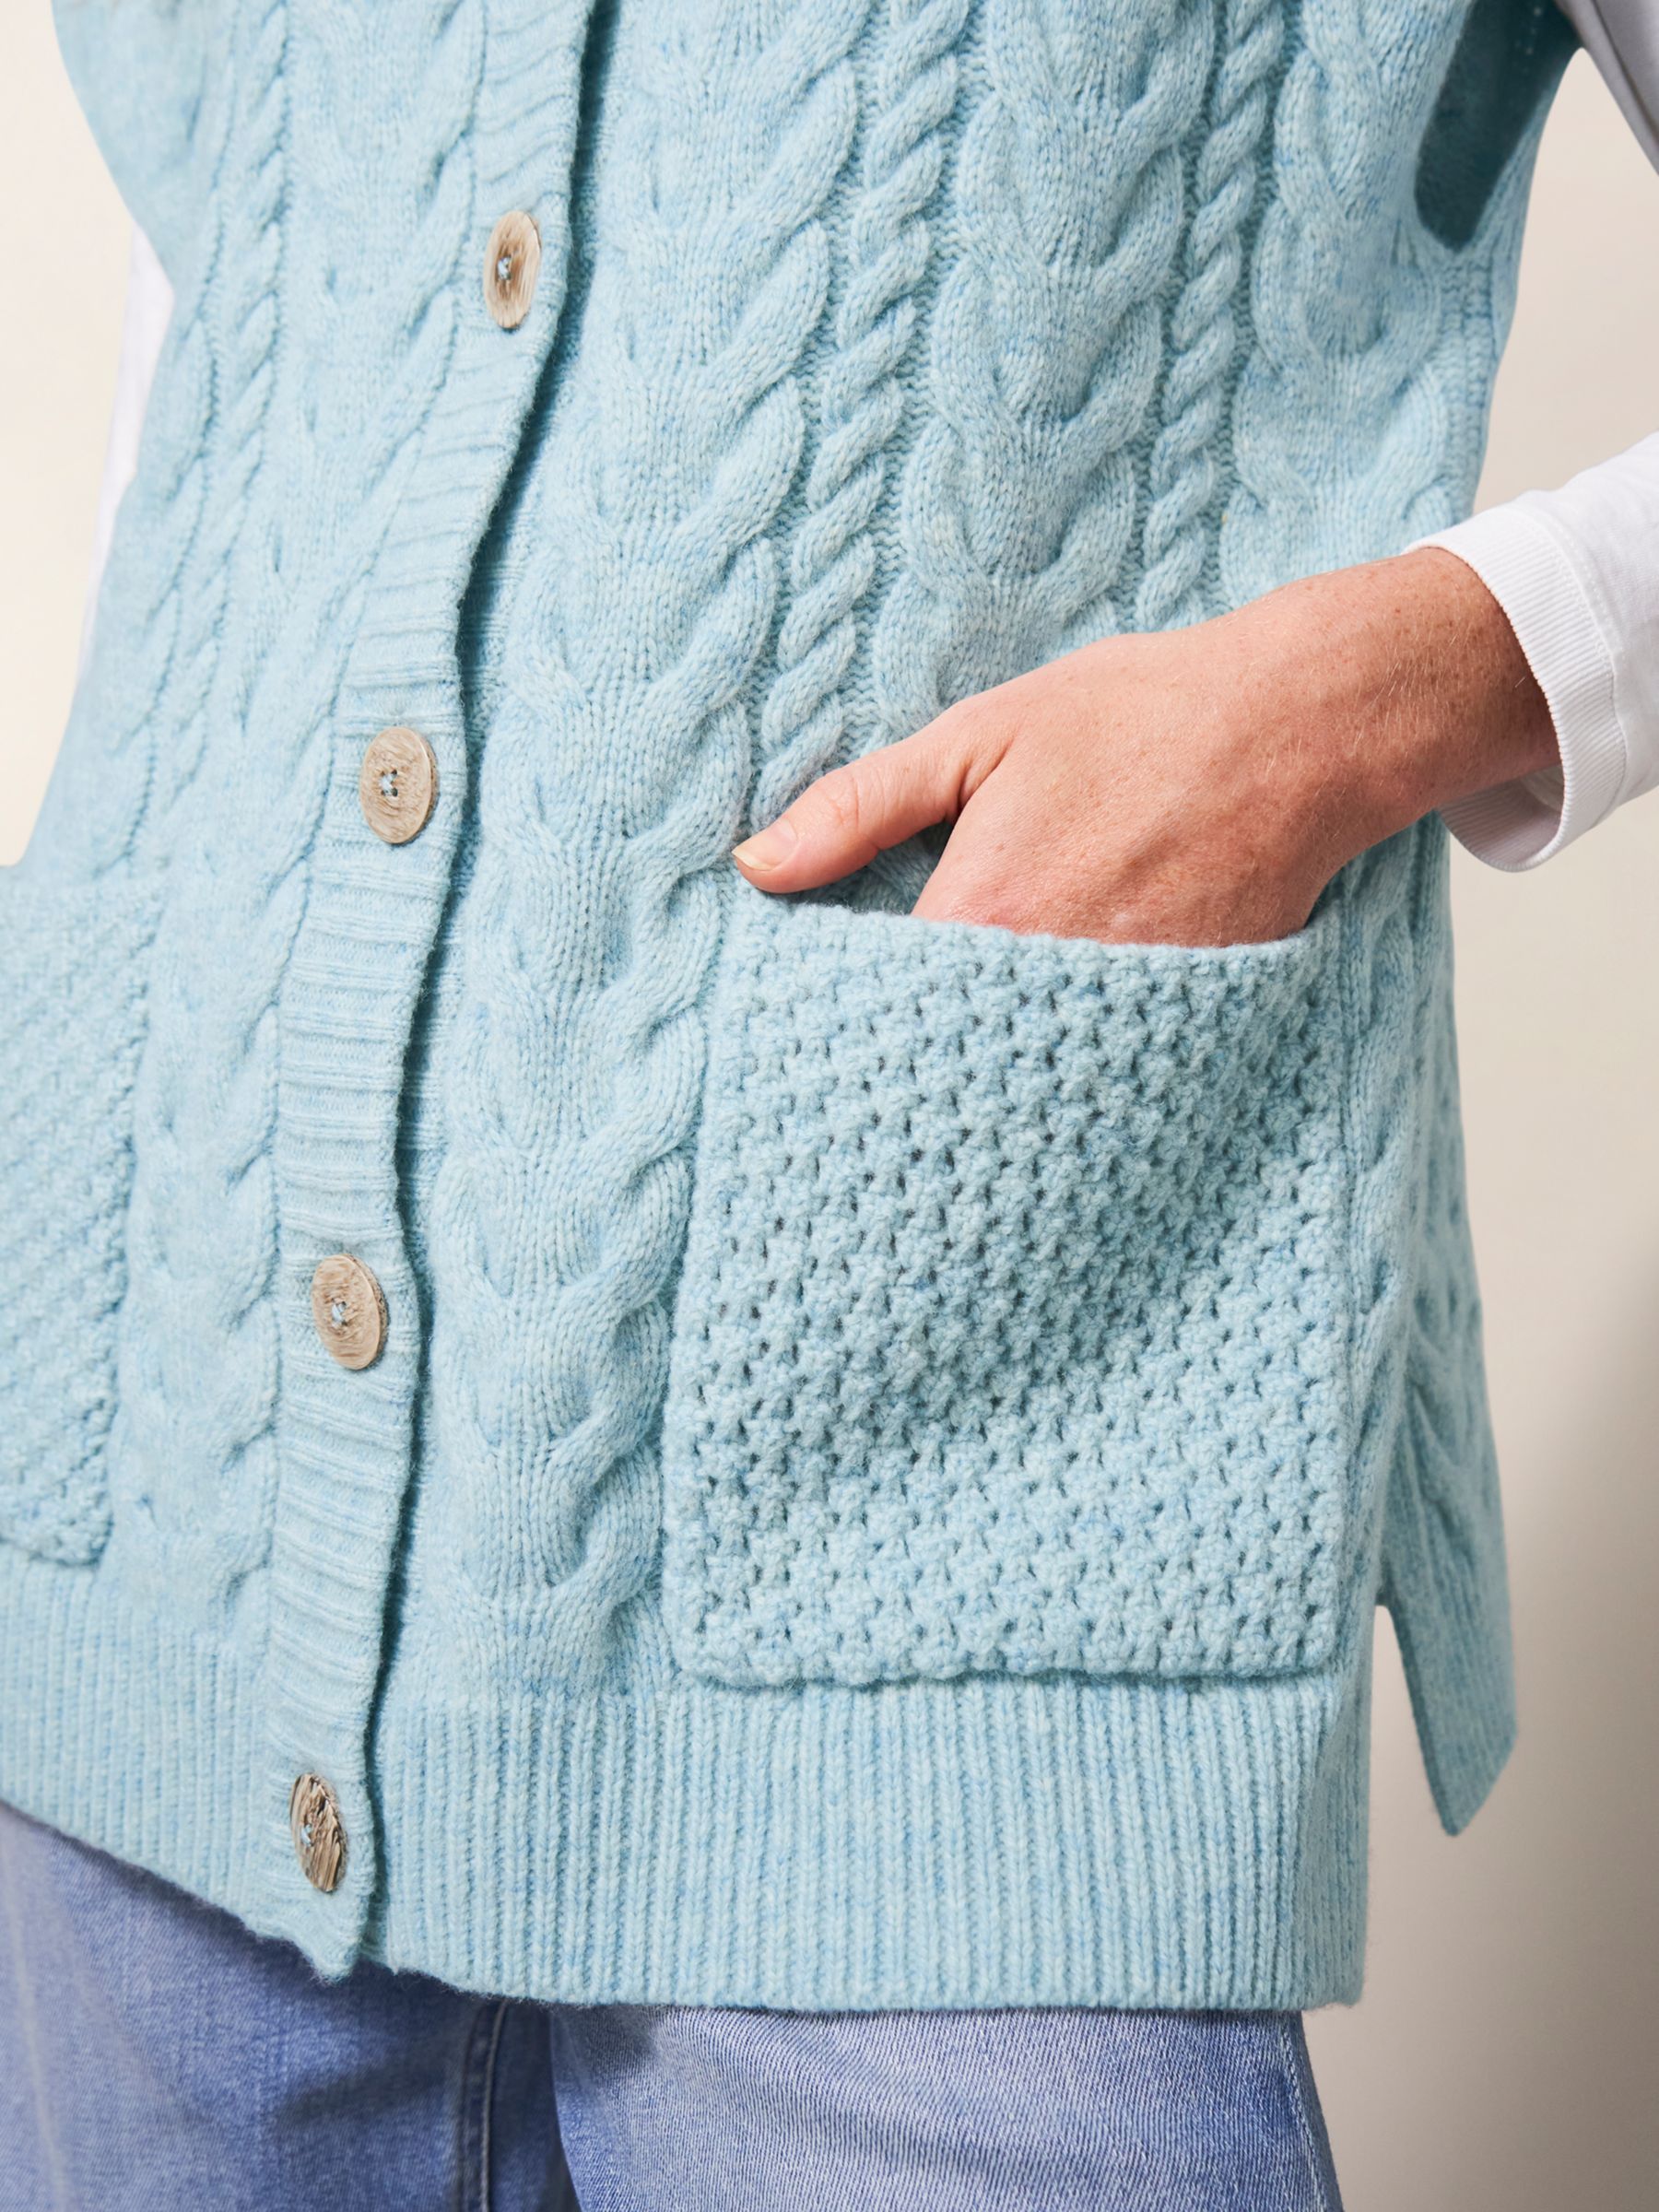 Buy White Stuff Cable Knit Cardigan Online at johnlewis.com